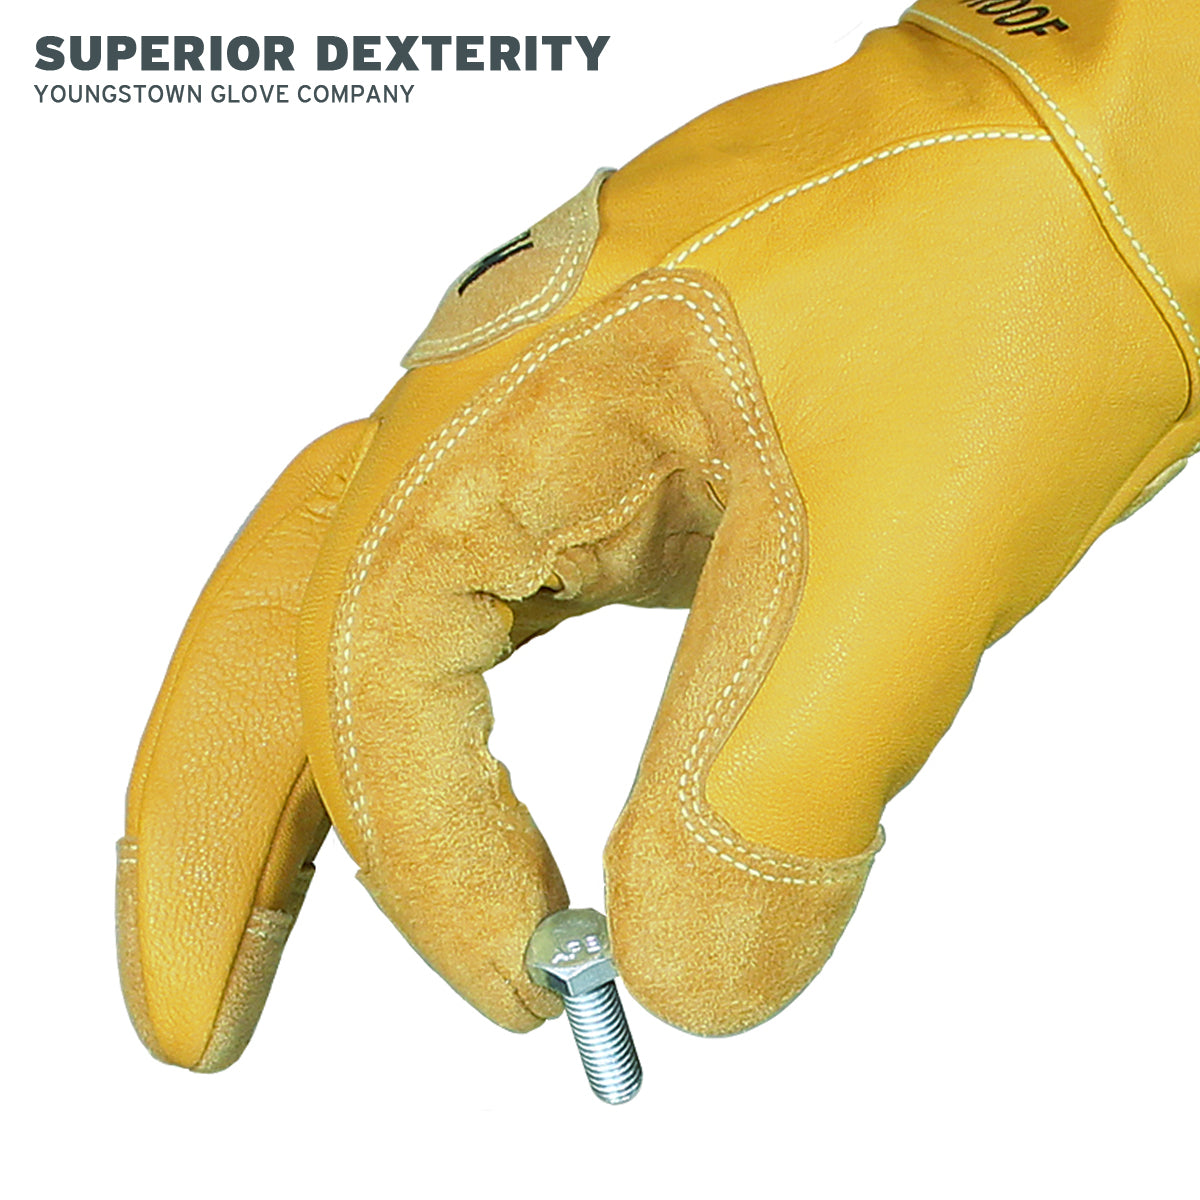 Oil / Water Resistant - Superior Glove